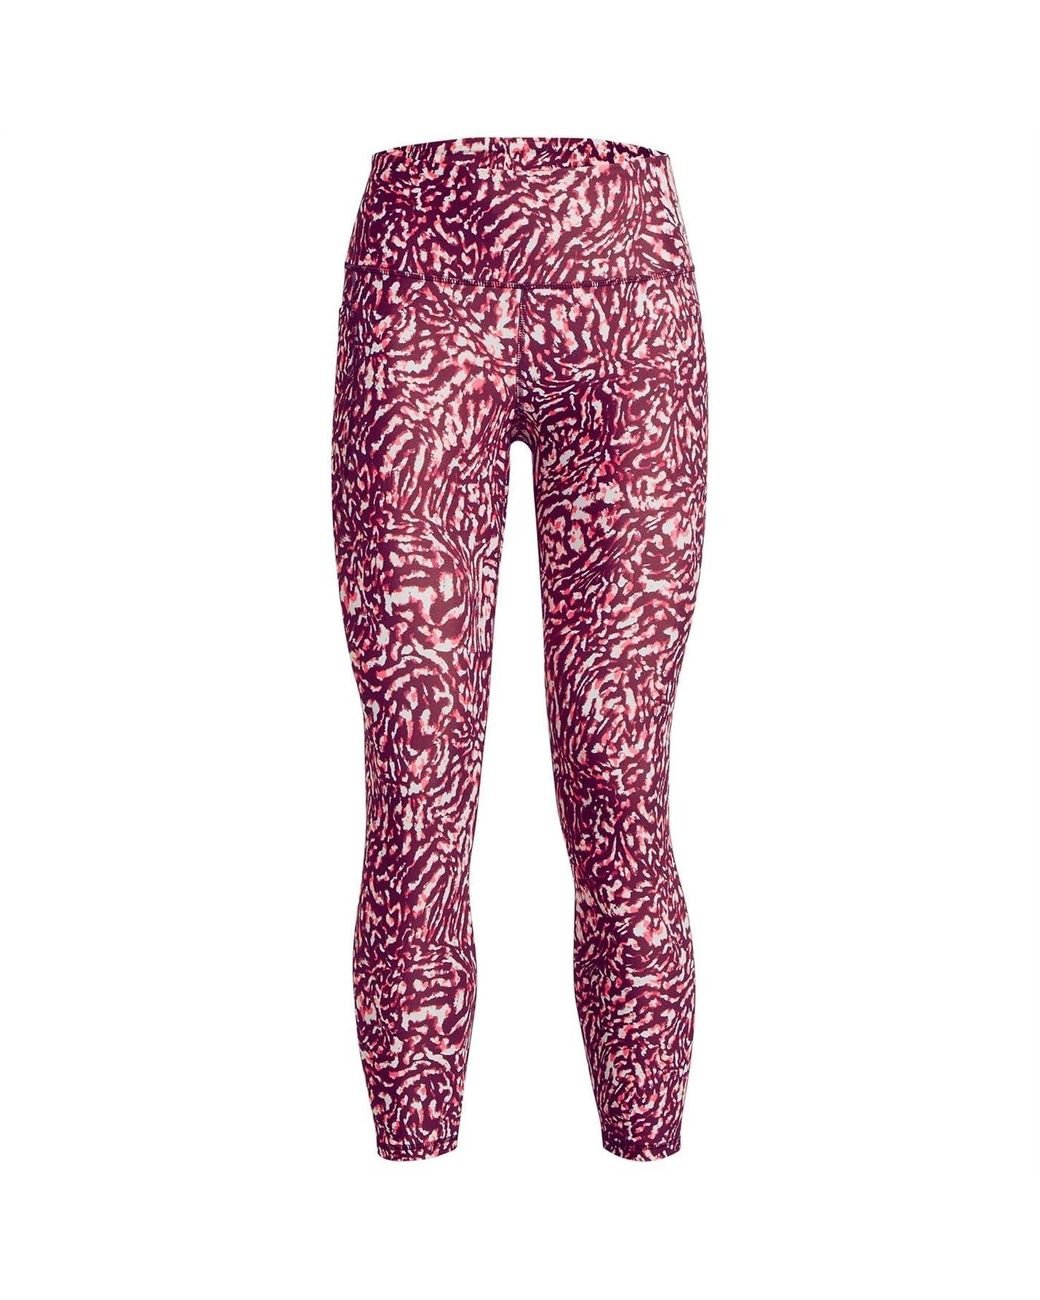 Under Armour S Printed Ankle Leggings Pink S in Red